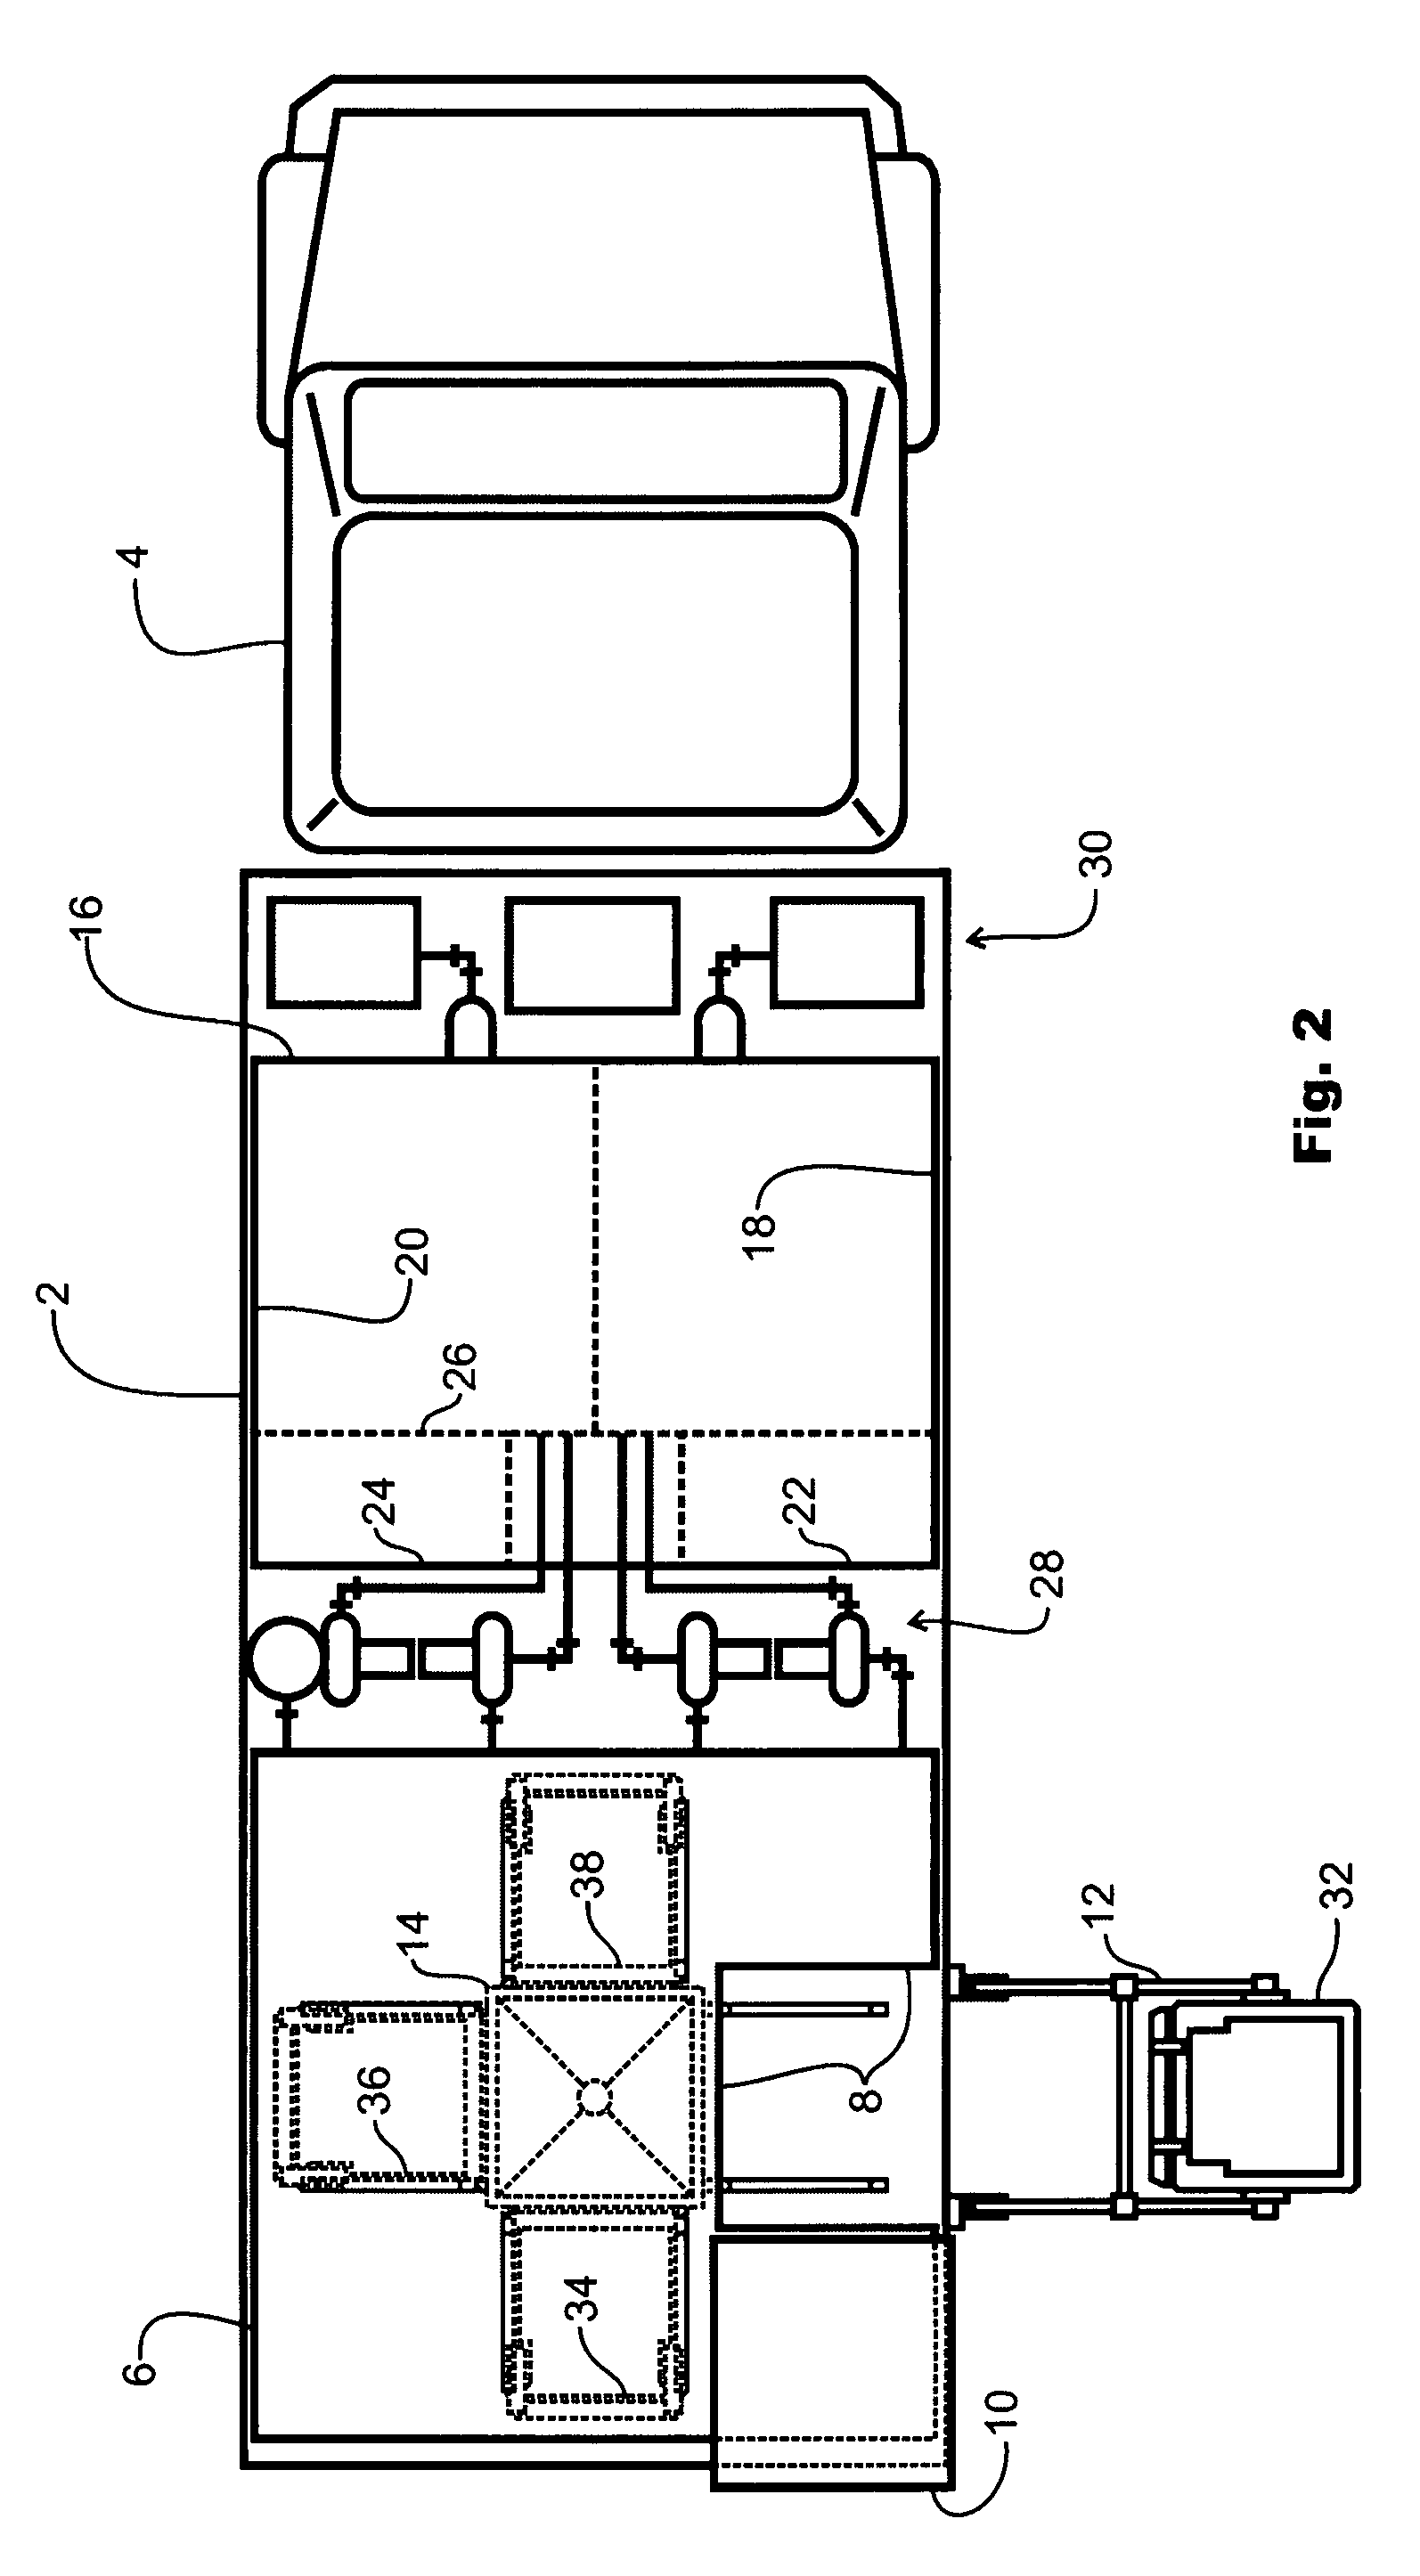 Mobile trash receptacle cleaning system and method